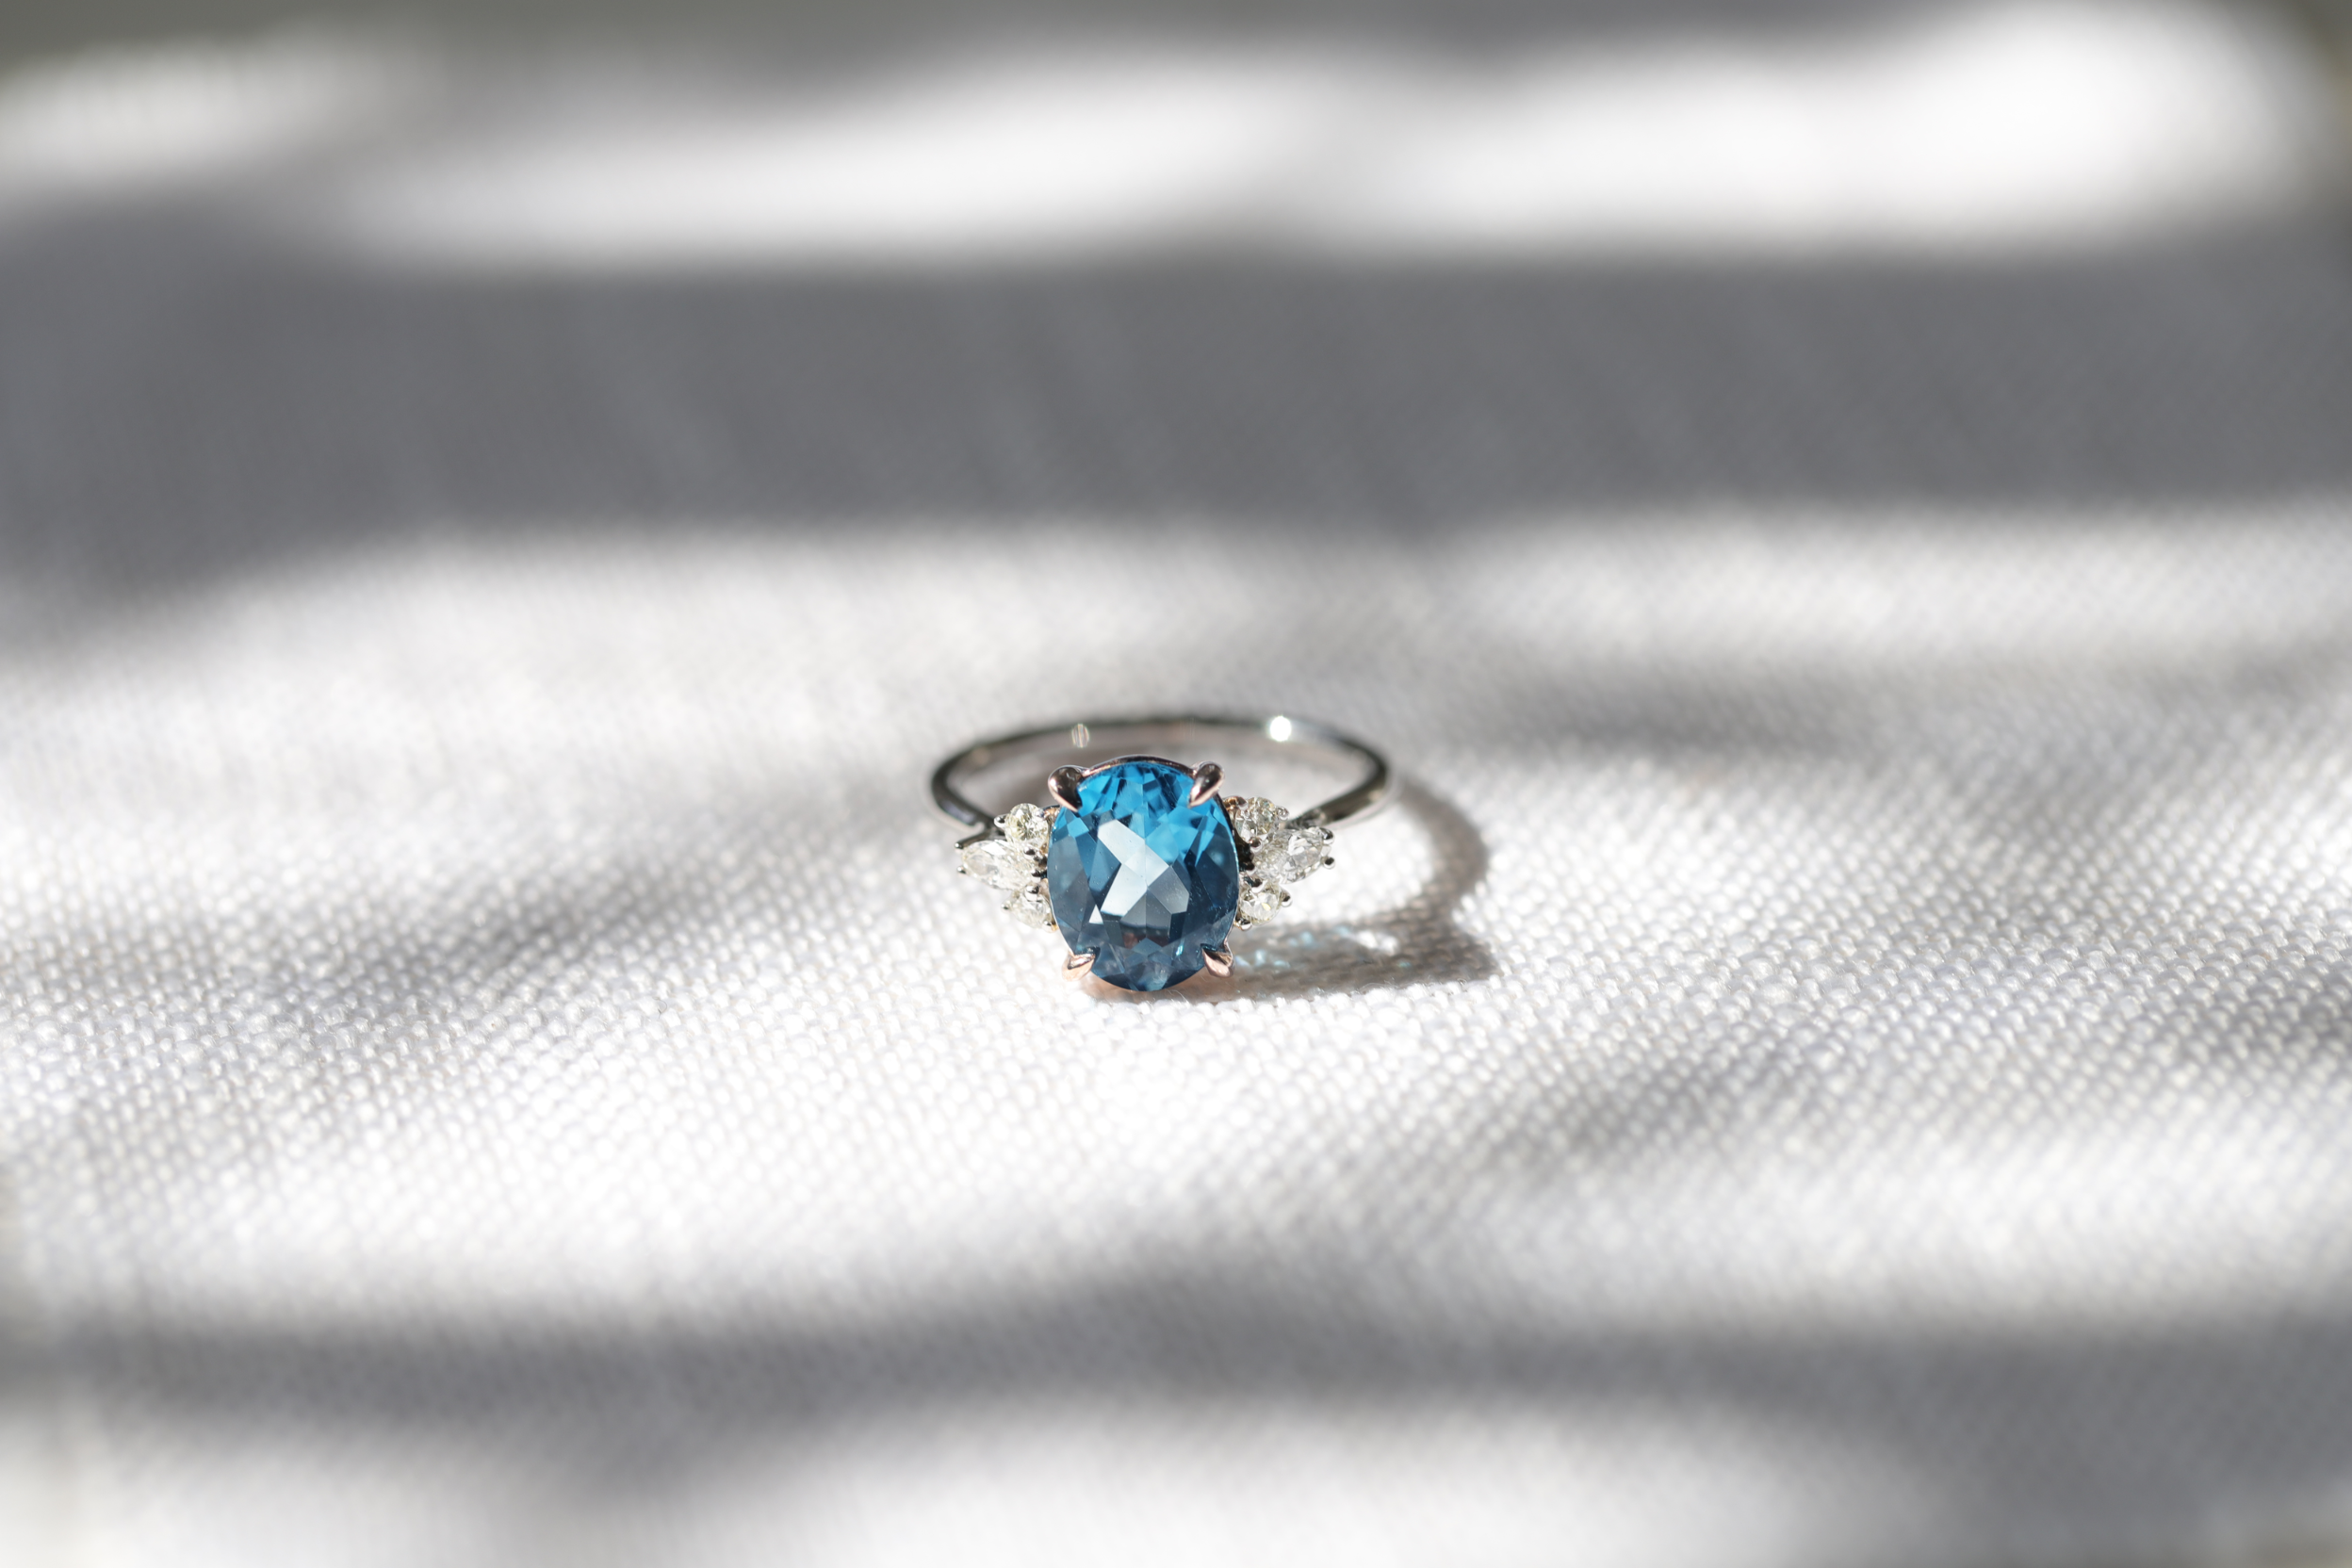 Reasons to Choose A Coloured Stone for Your Engagement Ring